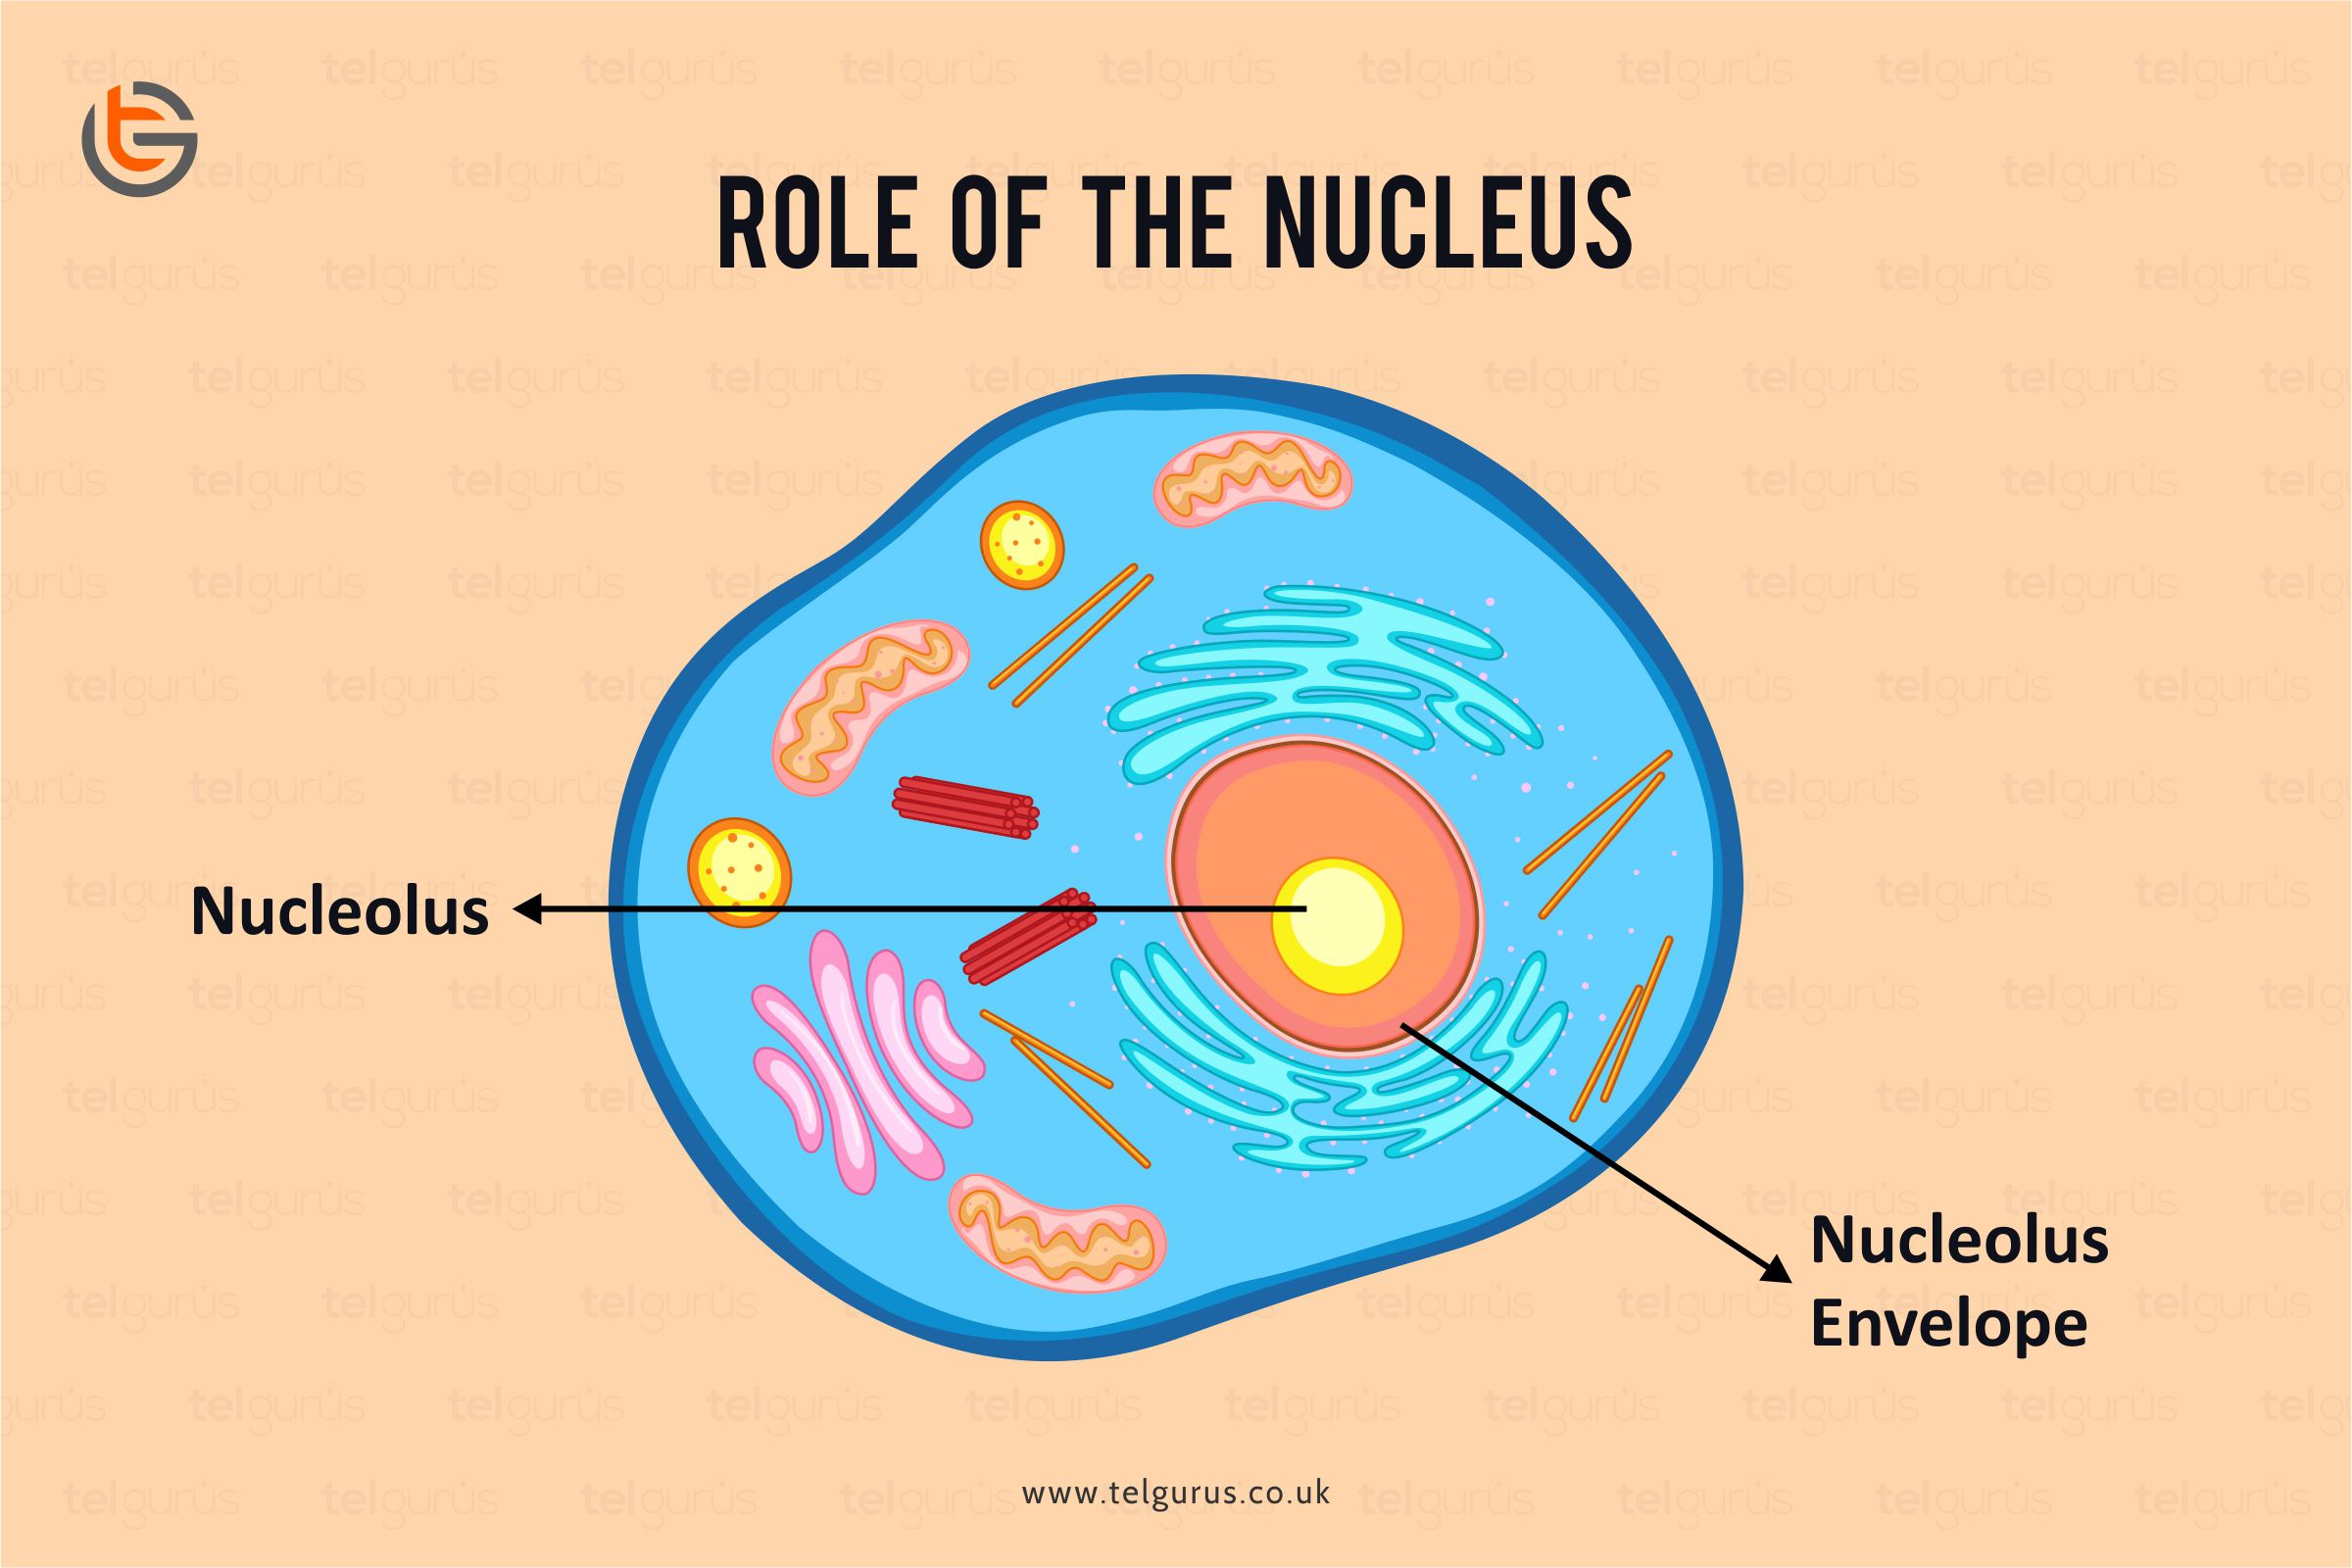 What is the role of the Nucleus?